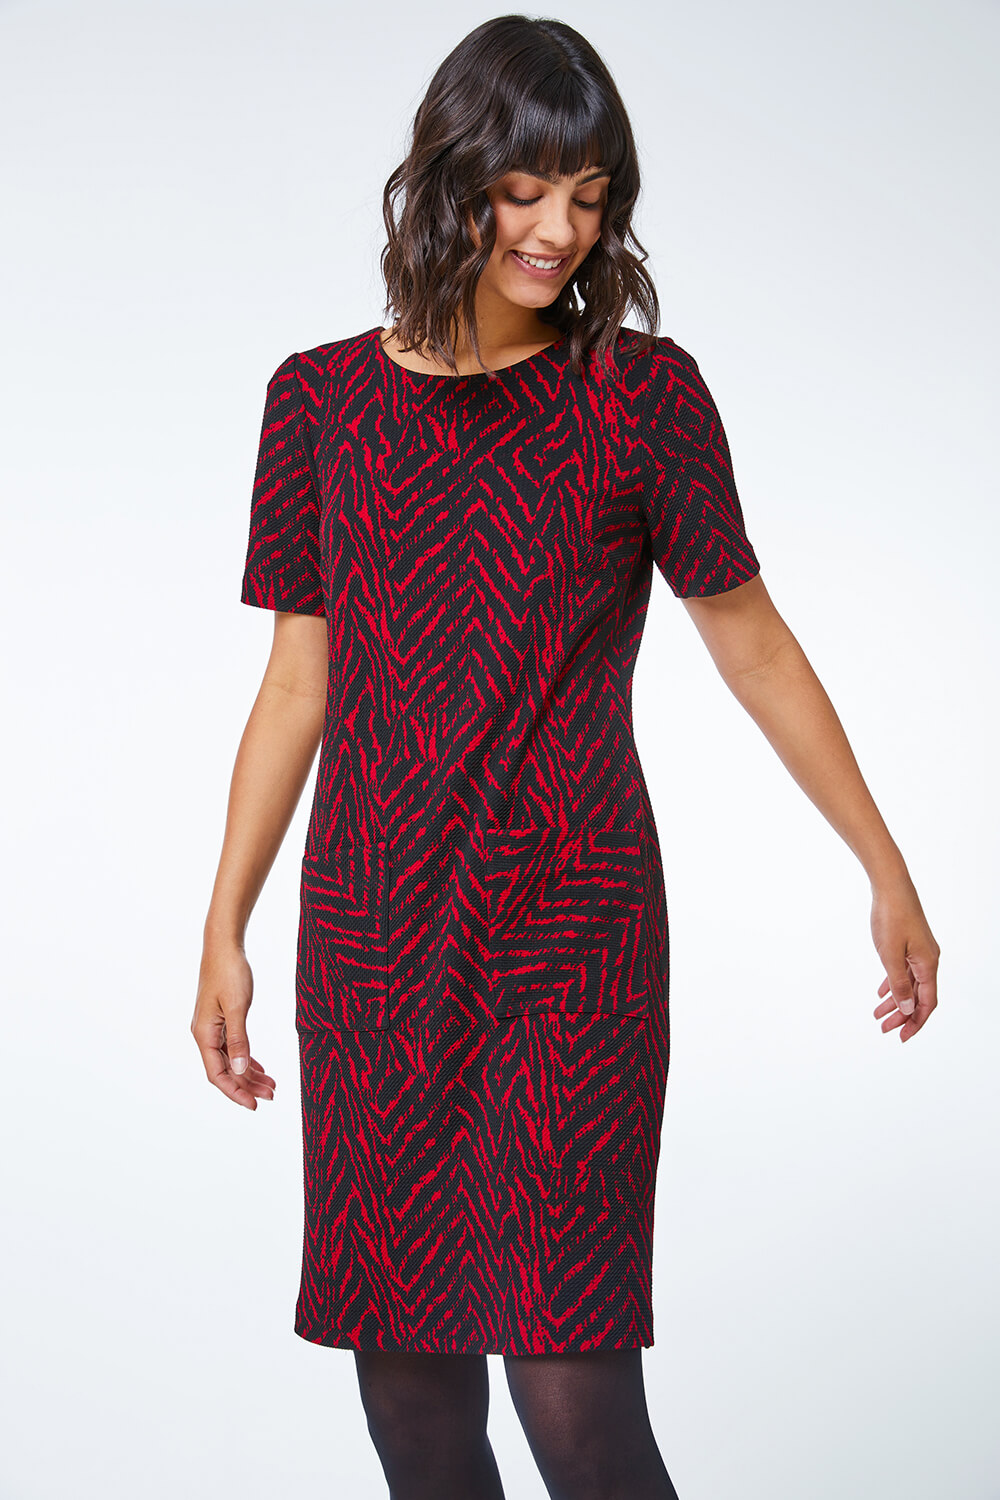 Red Textured Animal Print Stretch Tunic Dress, Image 2 of 5